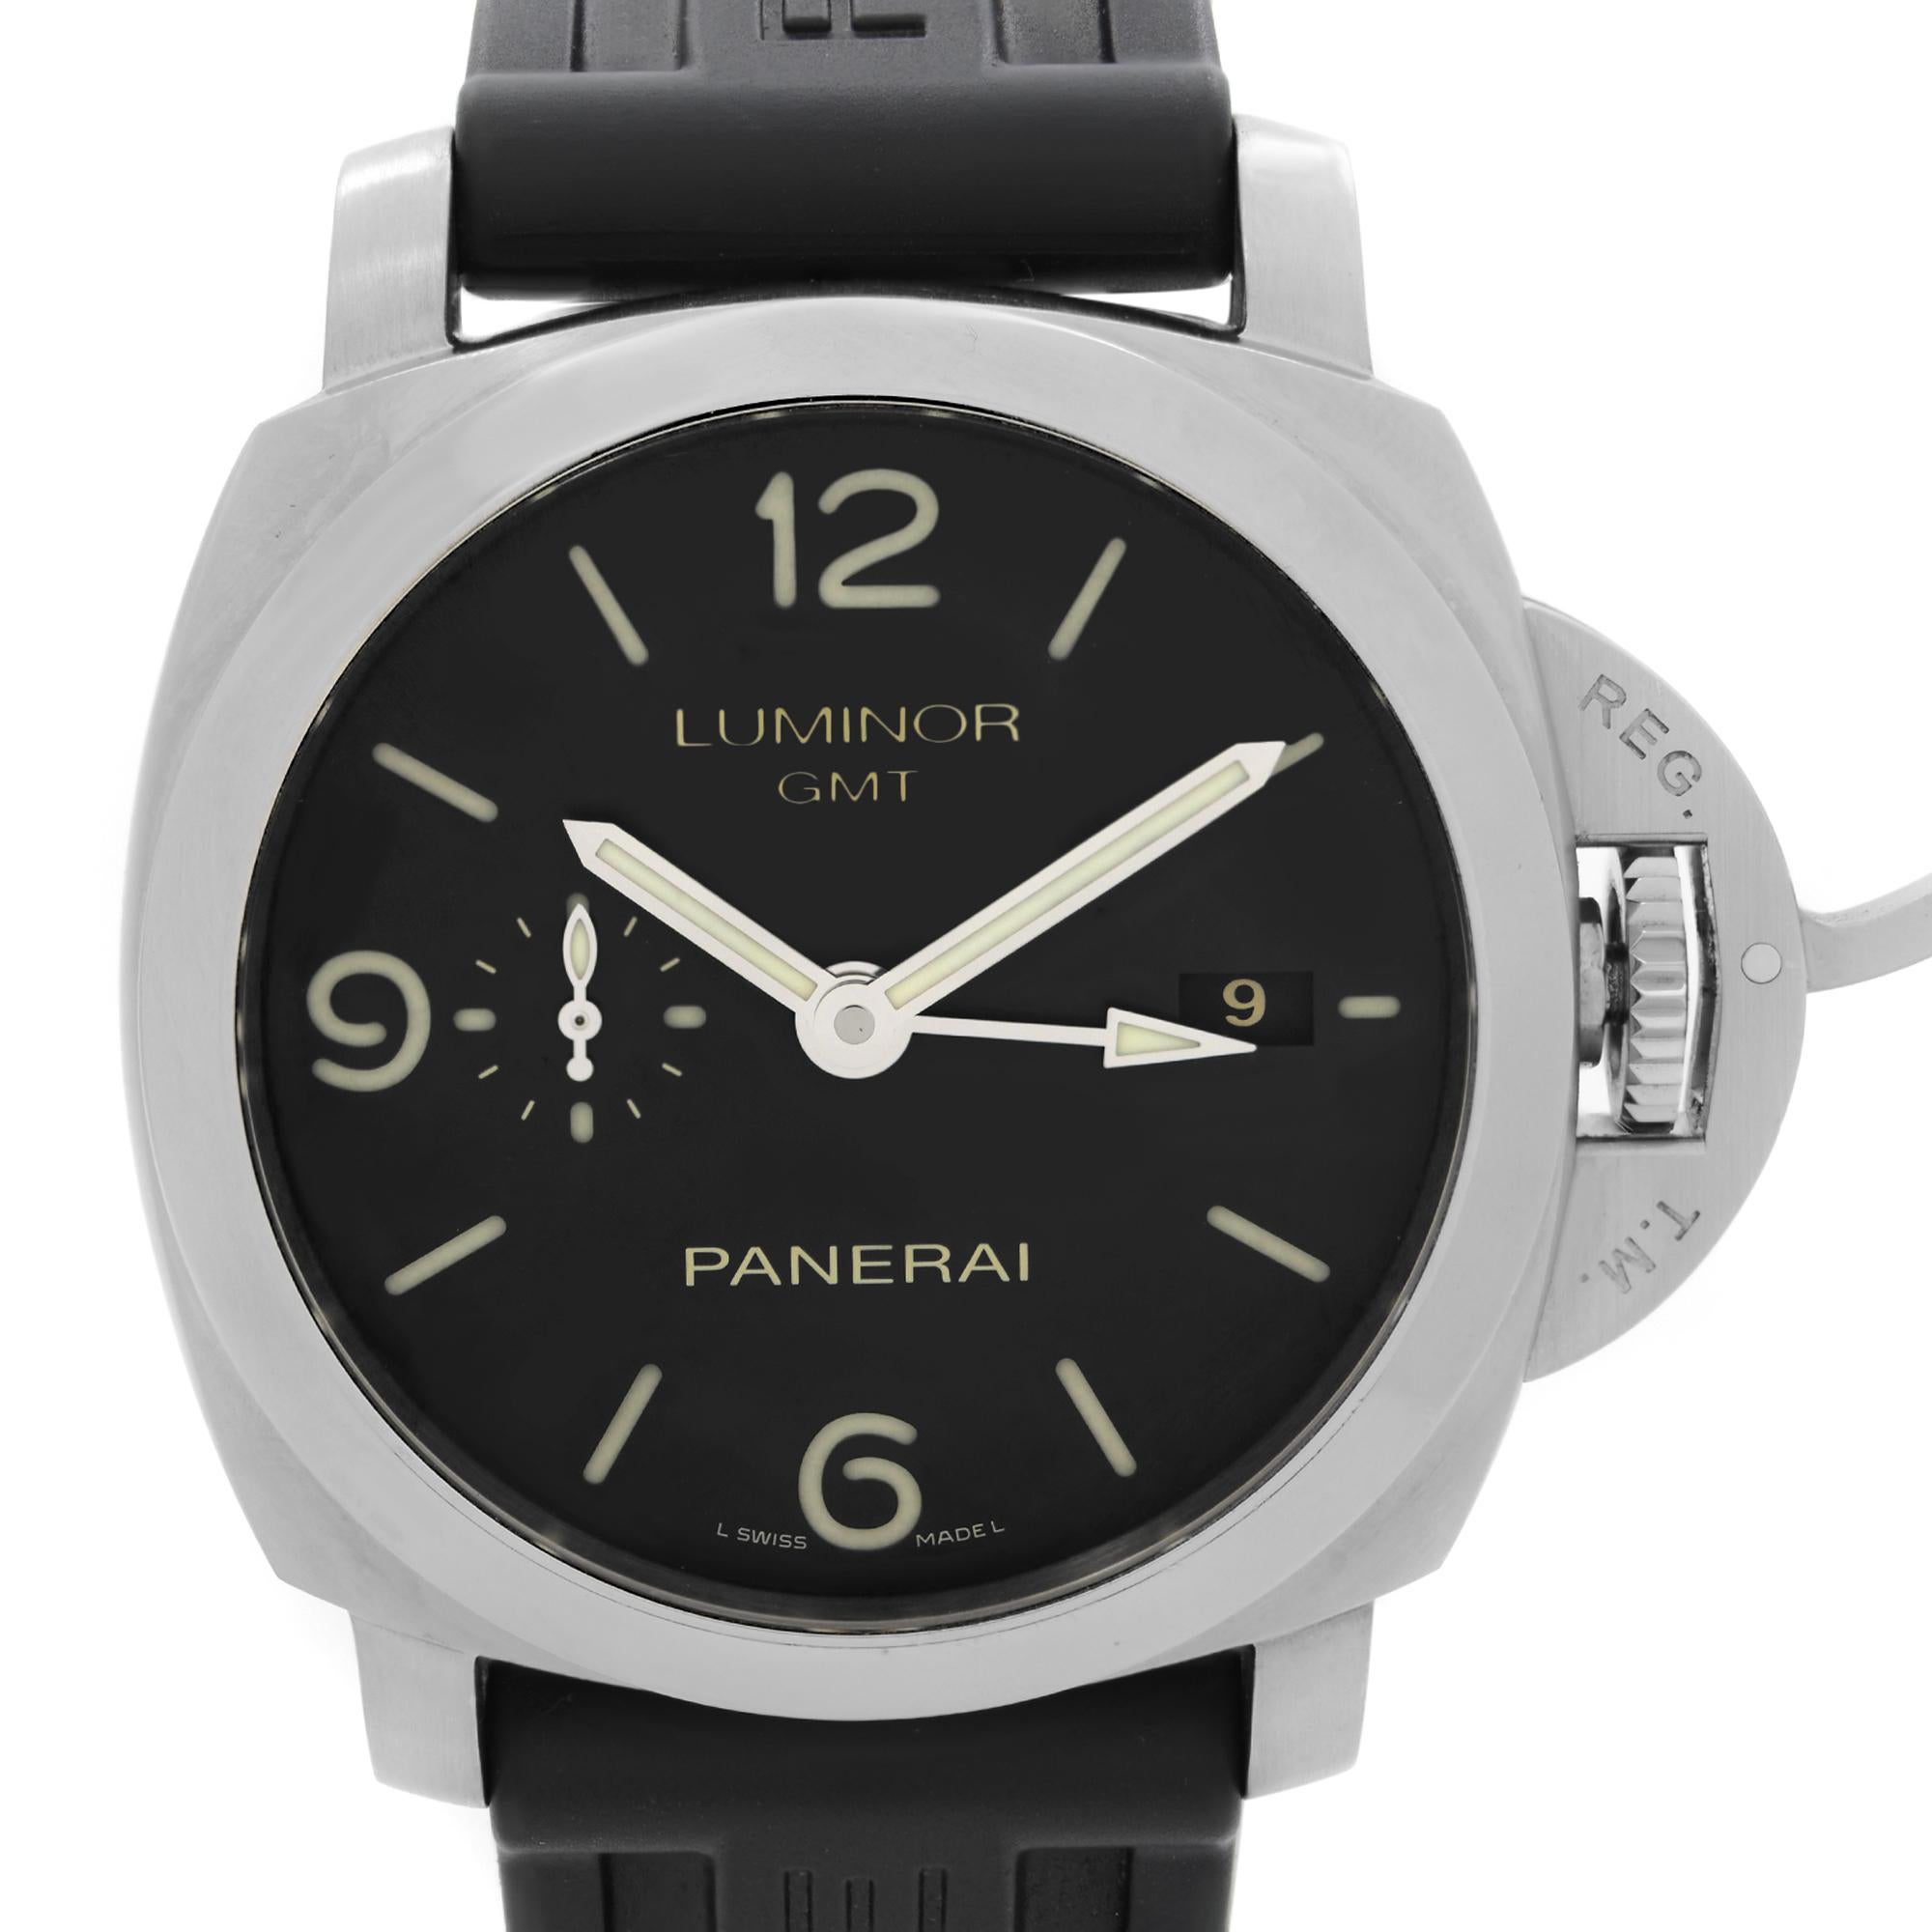 Pre-Owned Excellent condition Panerai Luminor GMT Steel Black Dial Rubber Strap Automatic Men's Watch PAM320. This Beautiful Timepiece is Powered by Mechanical (Automatic) Movement And Features: Stainless Steel Case with a Black Runner Strap, Fix